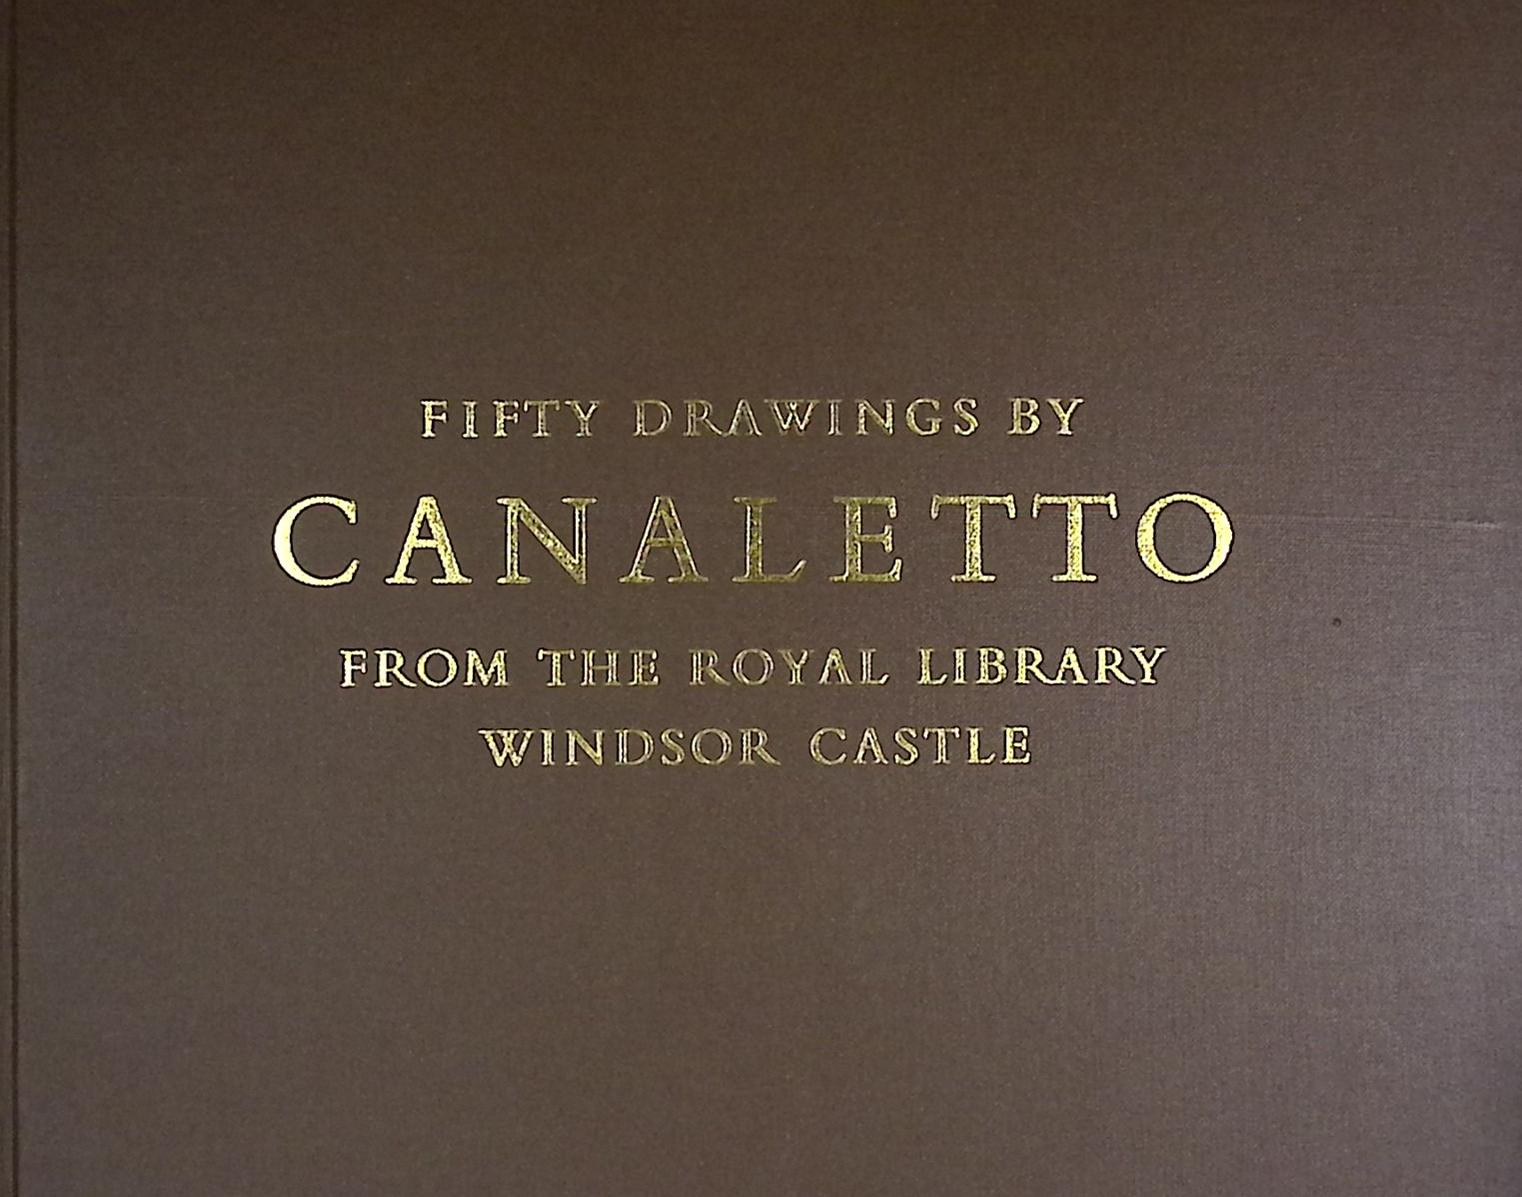 Fifty Drawings by Canaletto from the Royal Library Windsor Castle